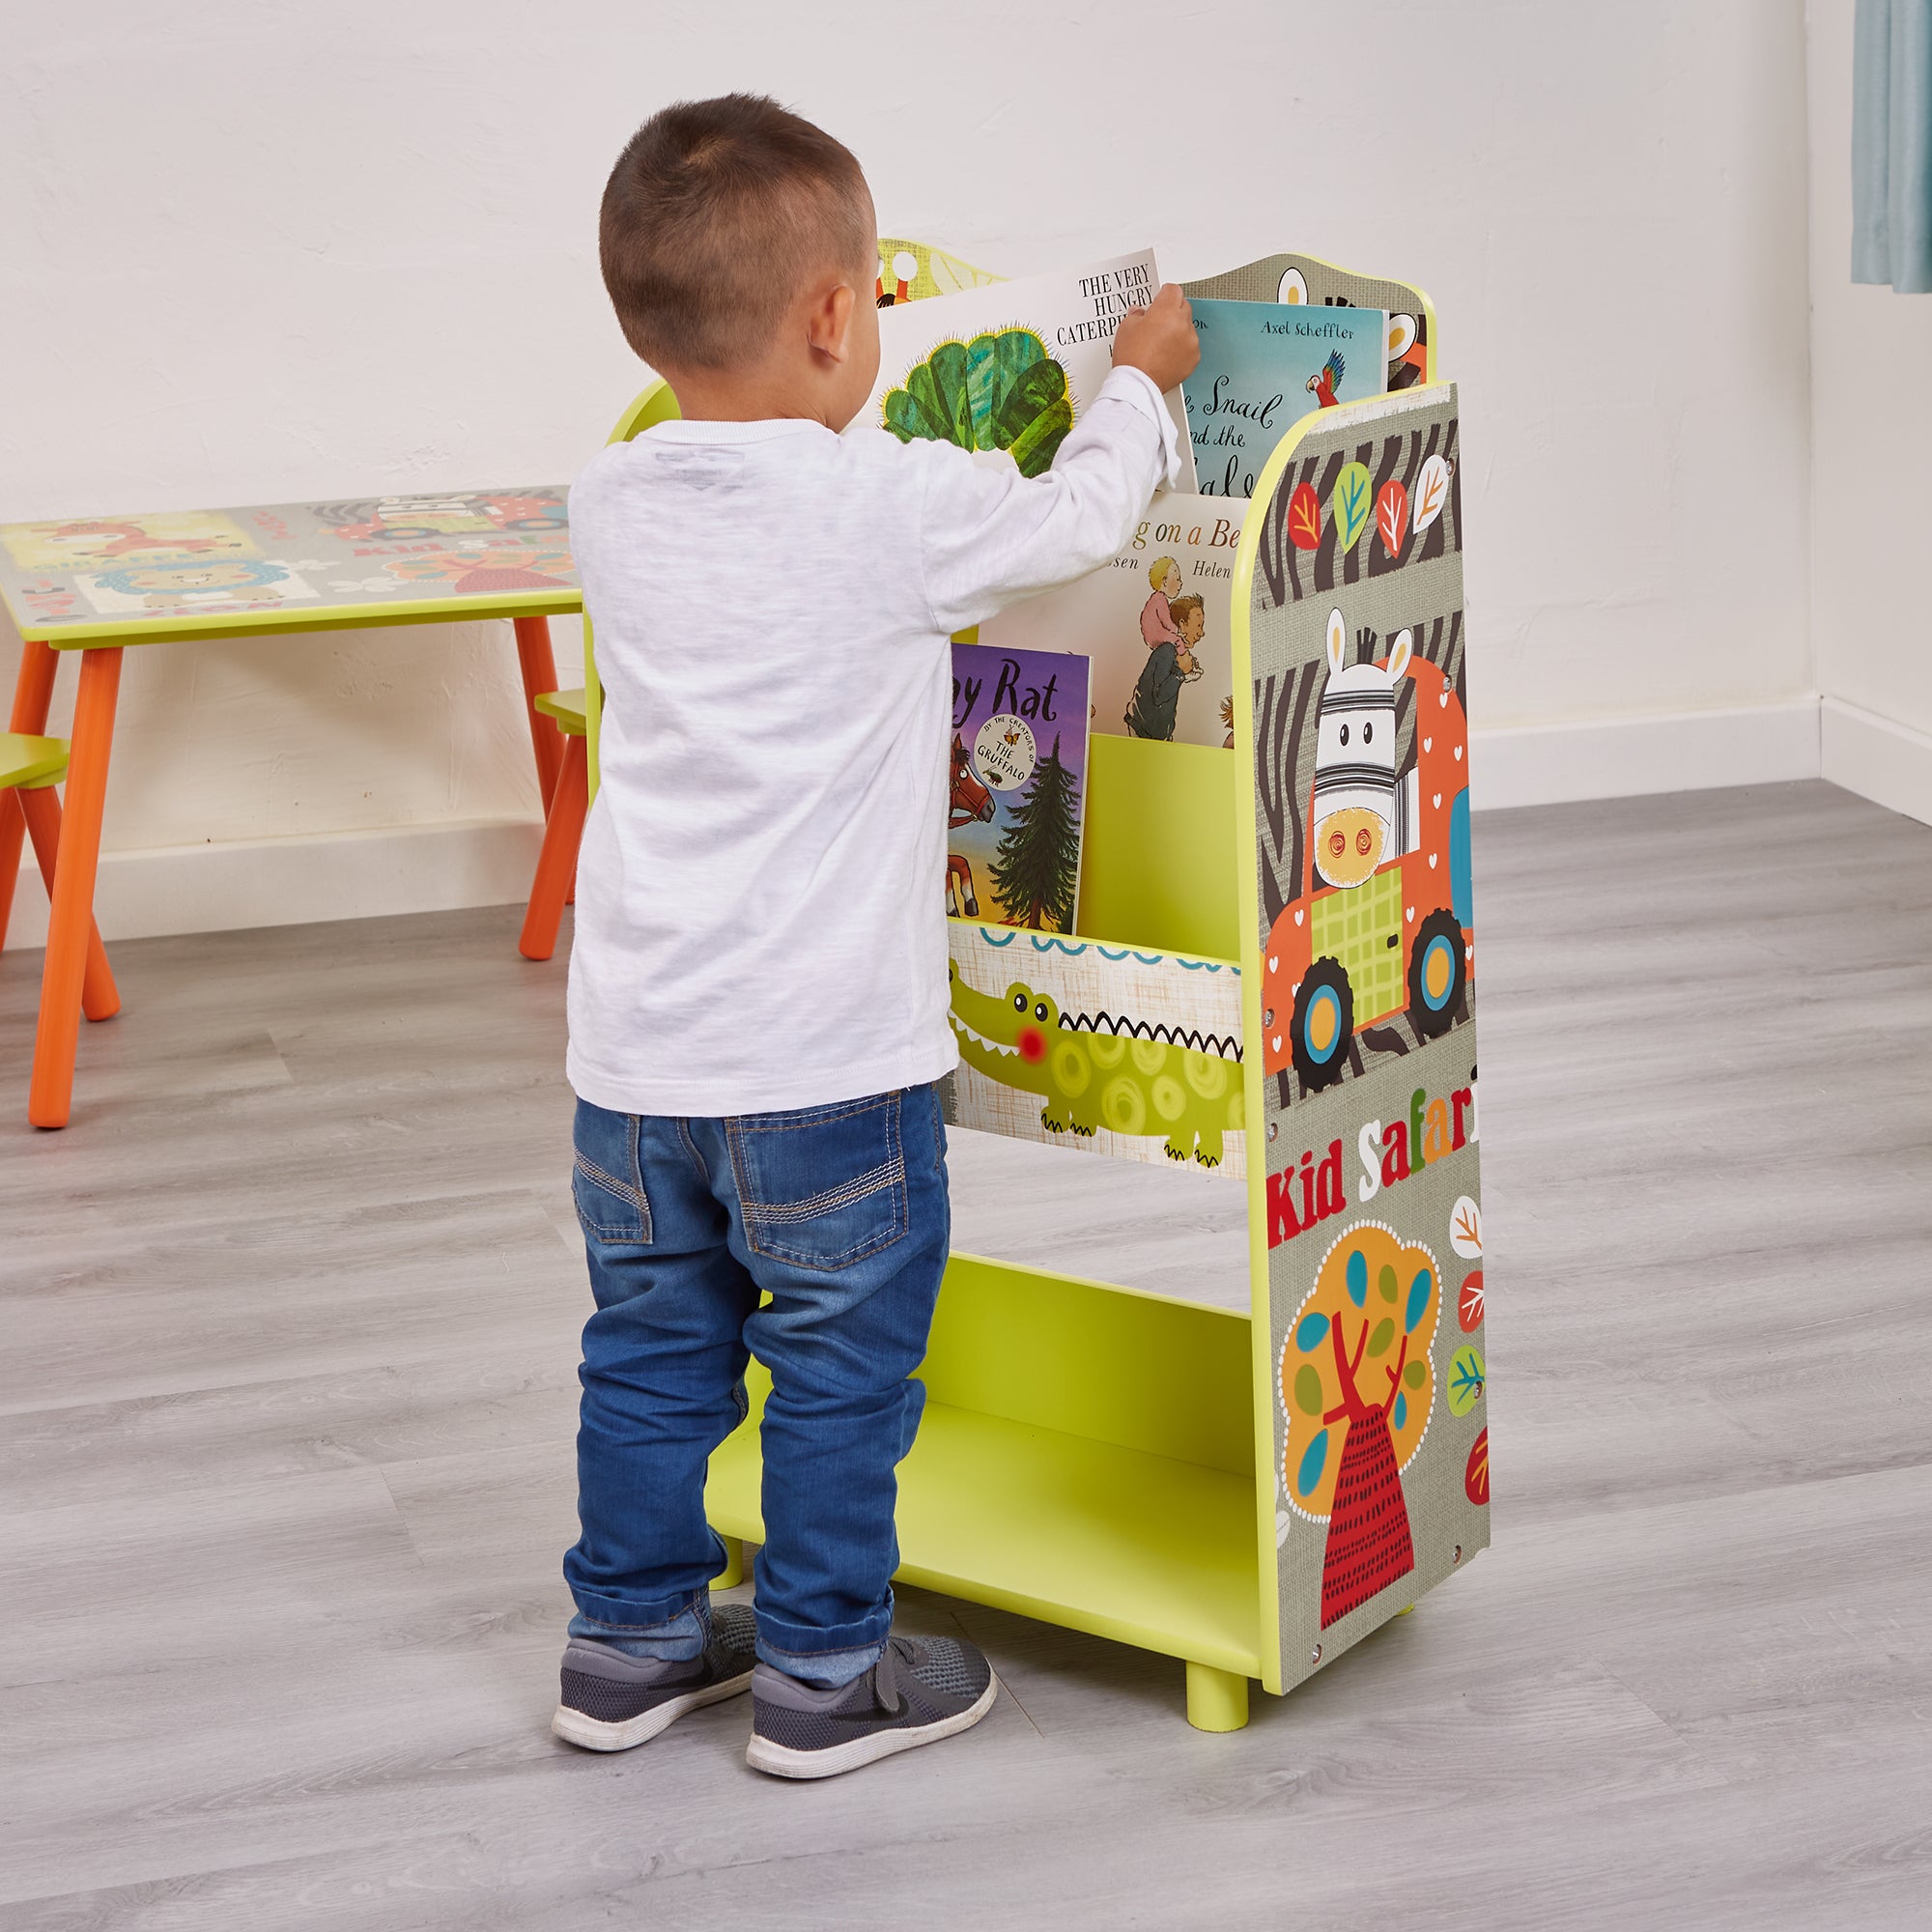 bookcase with toy storage